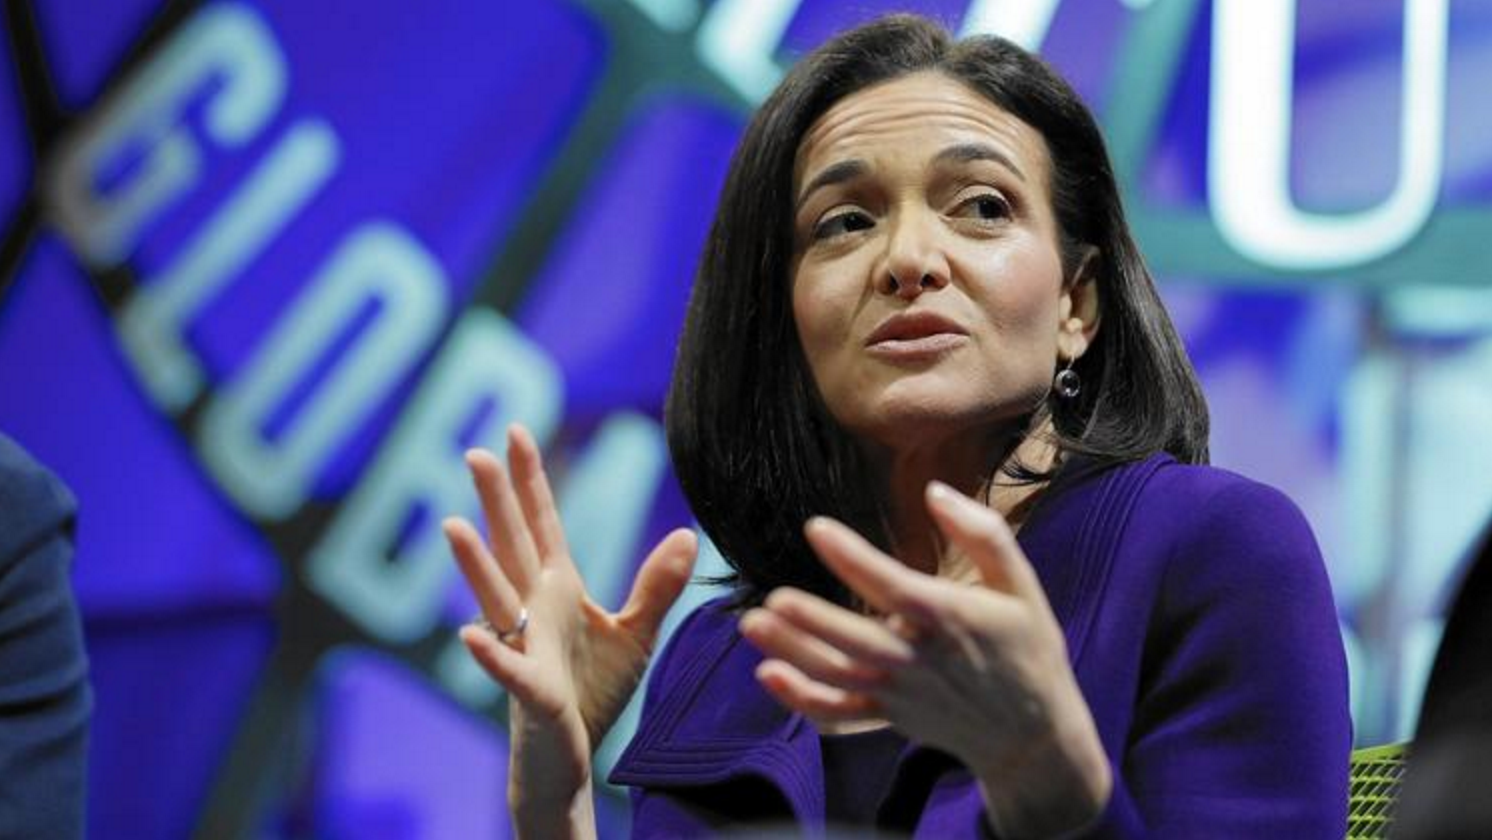 Facebook's chief operating officer Sheryl Sandberg during a discussion called The Now and Future of Mobile in San Francisco on Nov. 3, 2015; links to news story